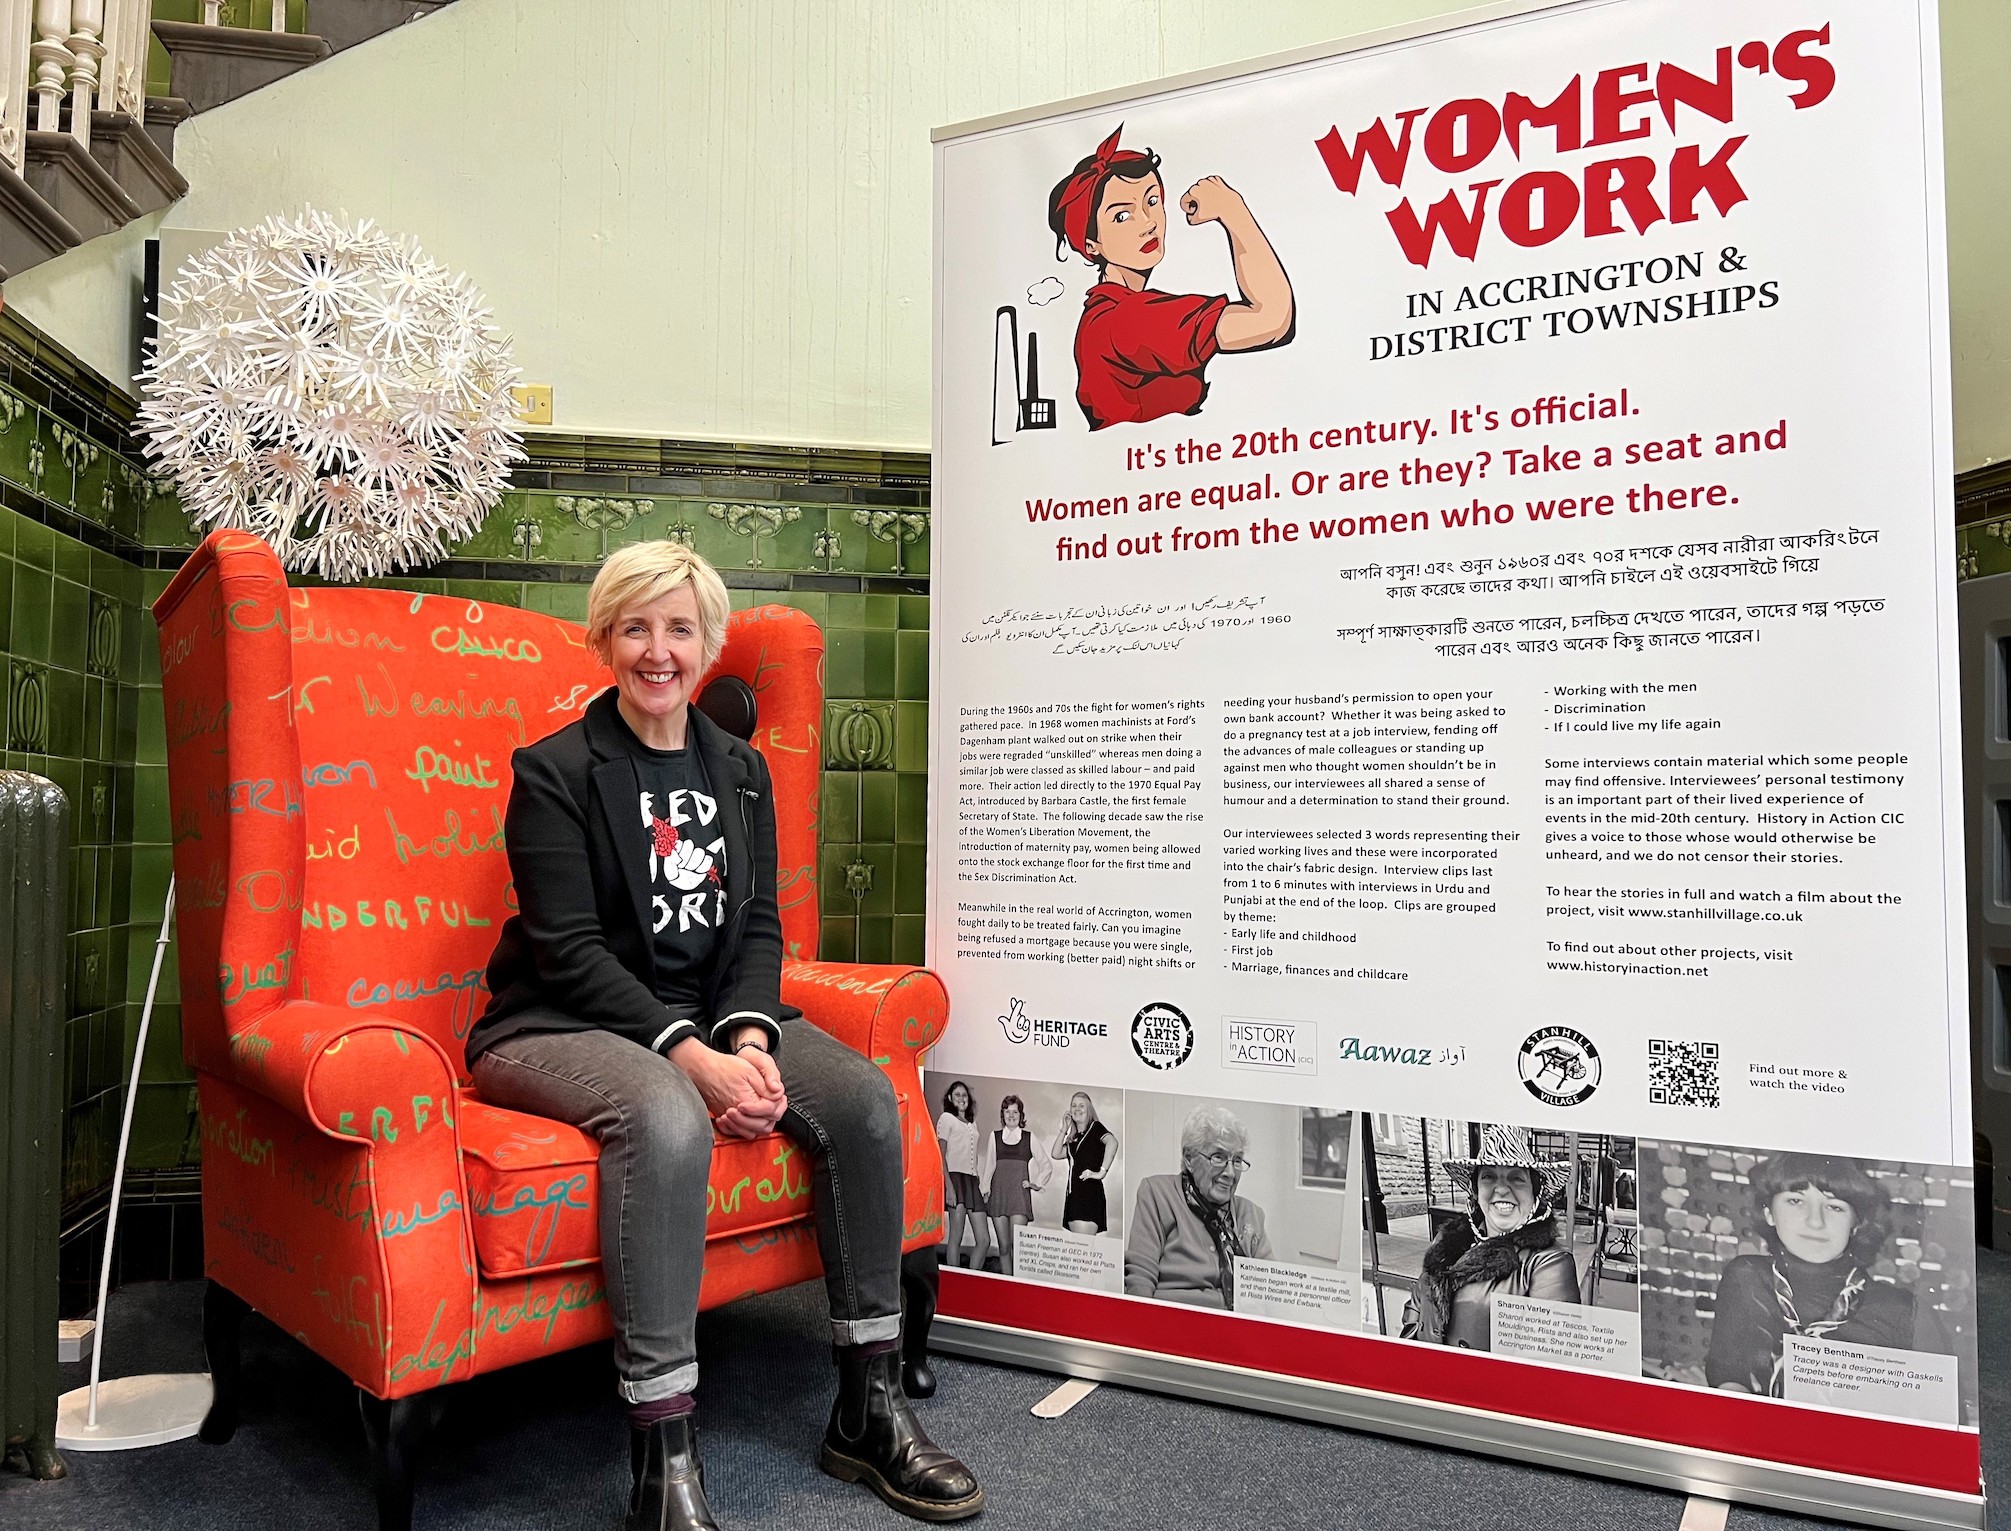 New Talking Chair telling stories of local women installed in Accrington Library